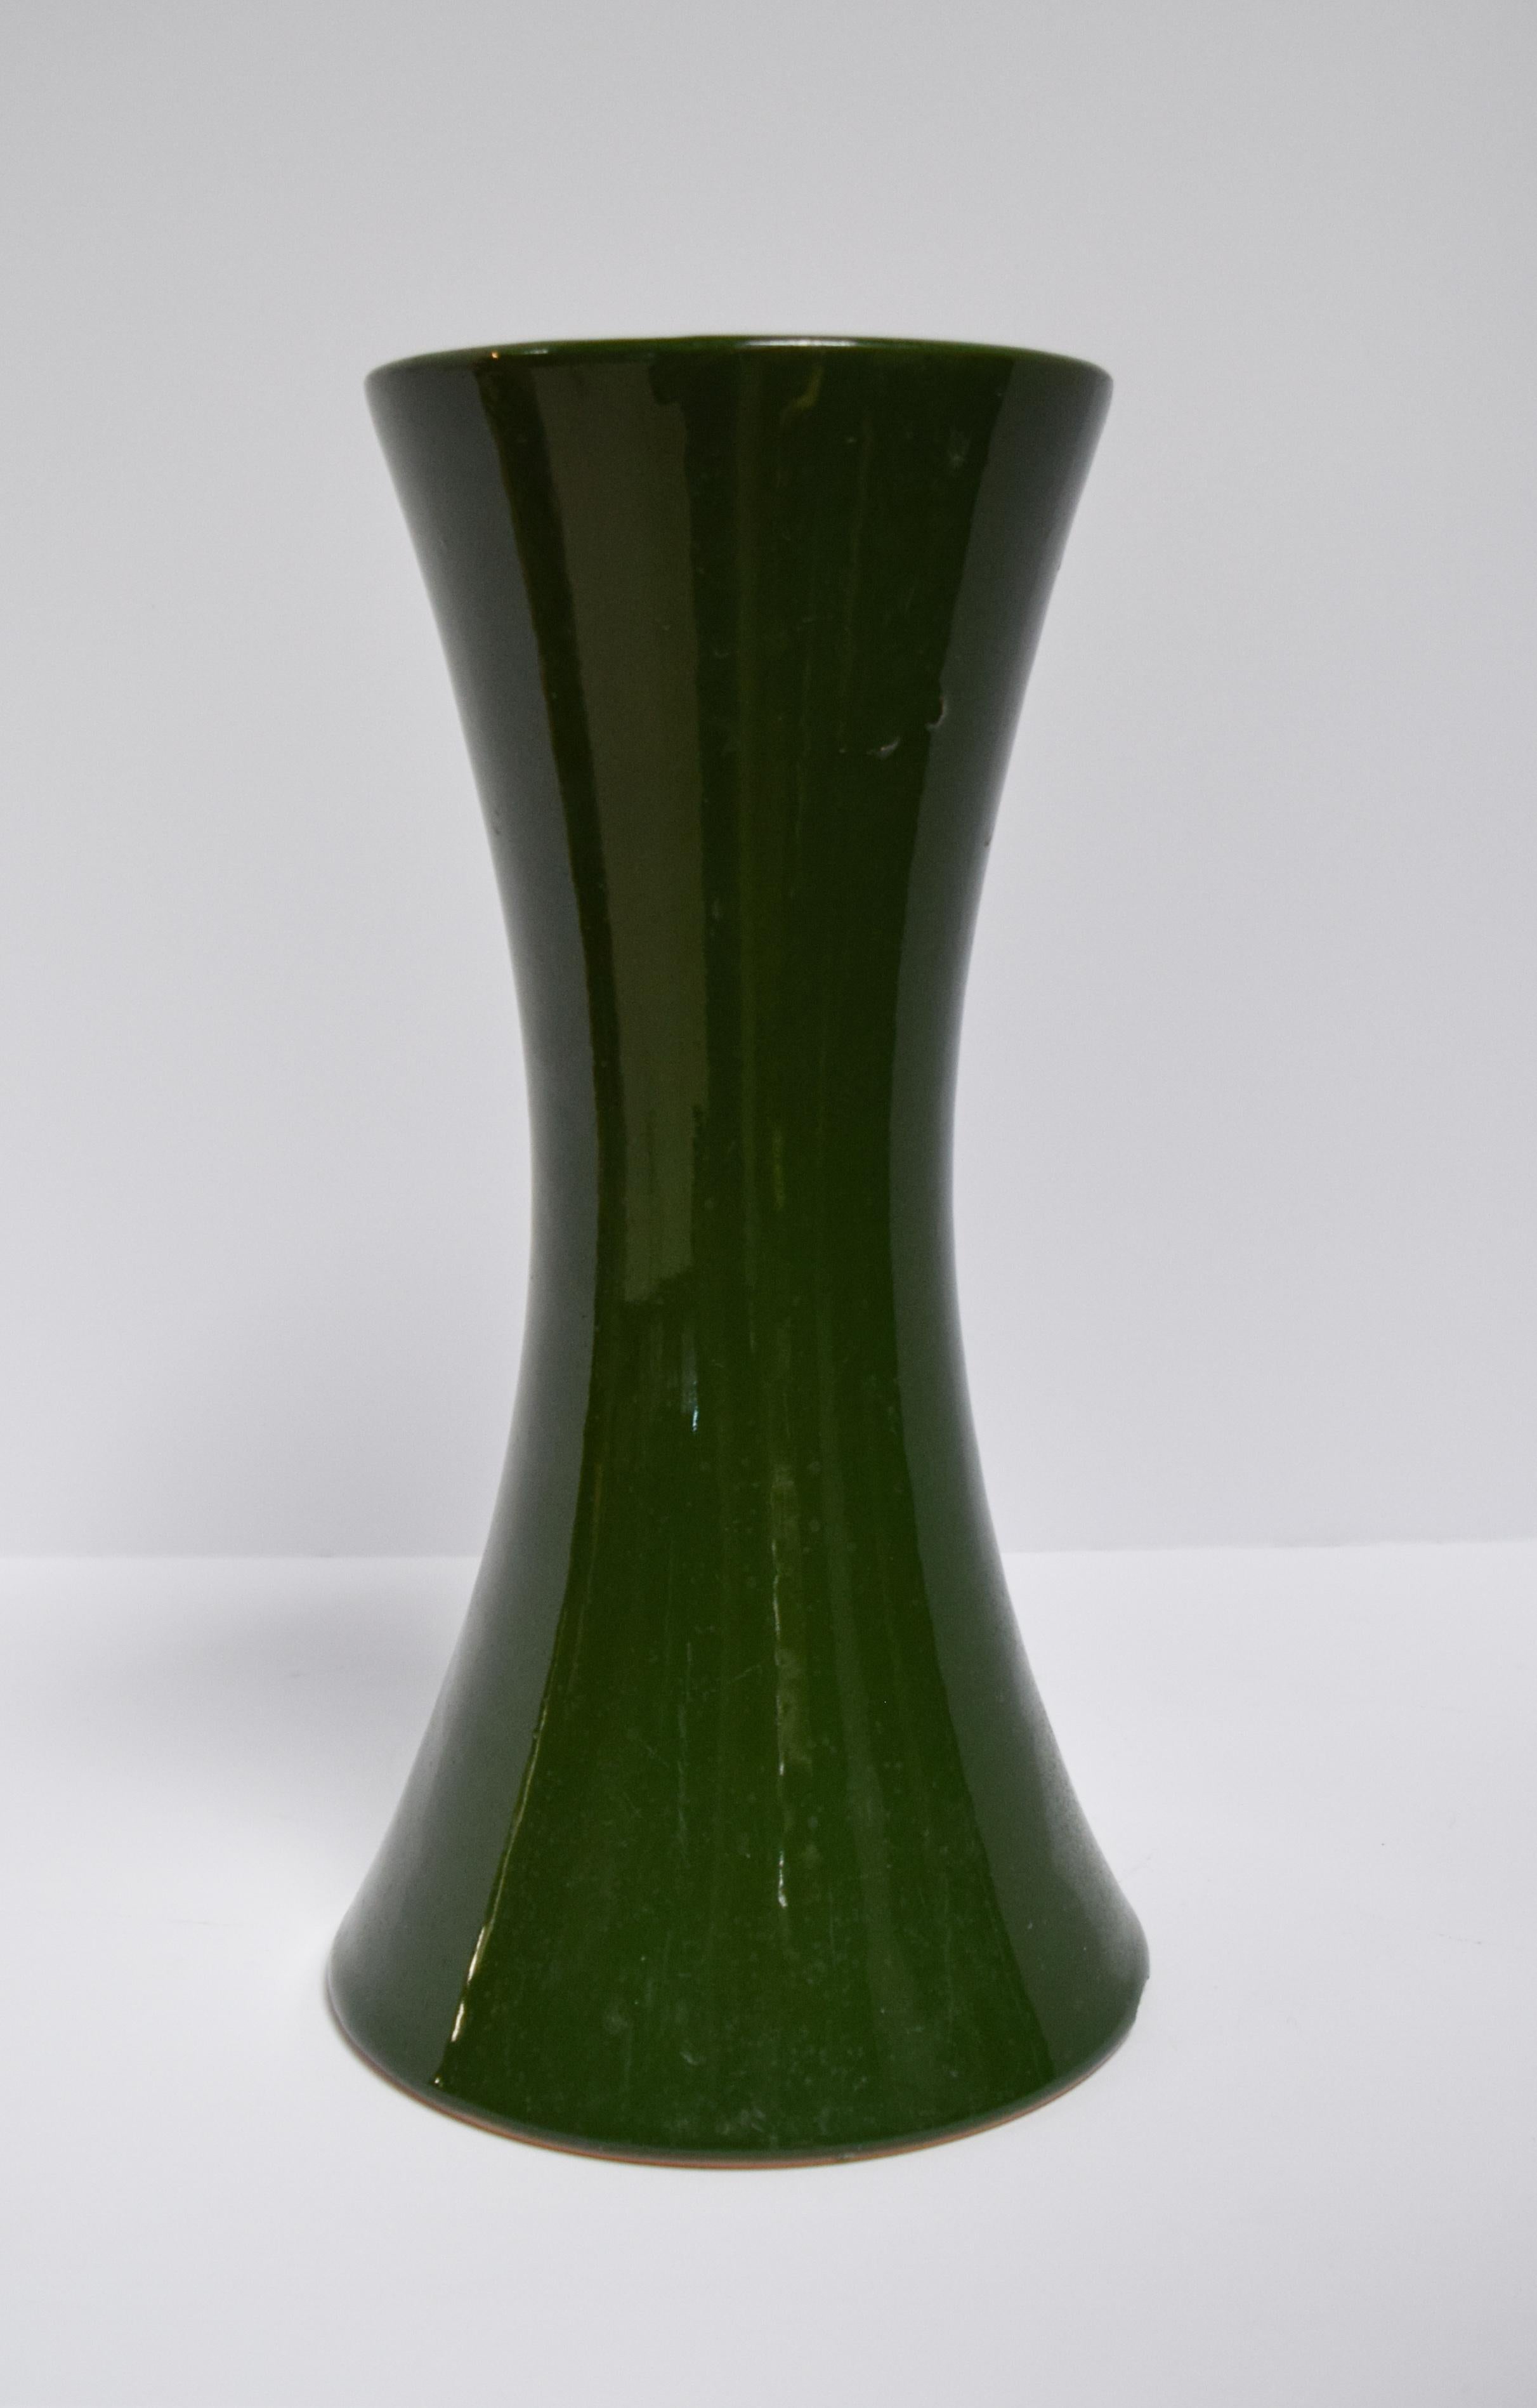 These vases are souvenirs from floral competitions of the 1850s. With an attractive hourglass shape, these vases are the ideal shape for floral arrangements. The structural flair is still incredibly stylish and with its eye-catching bottle green